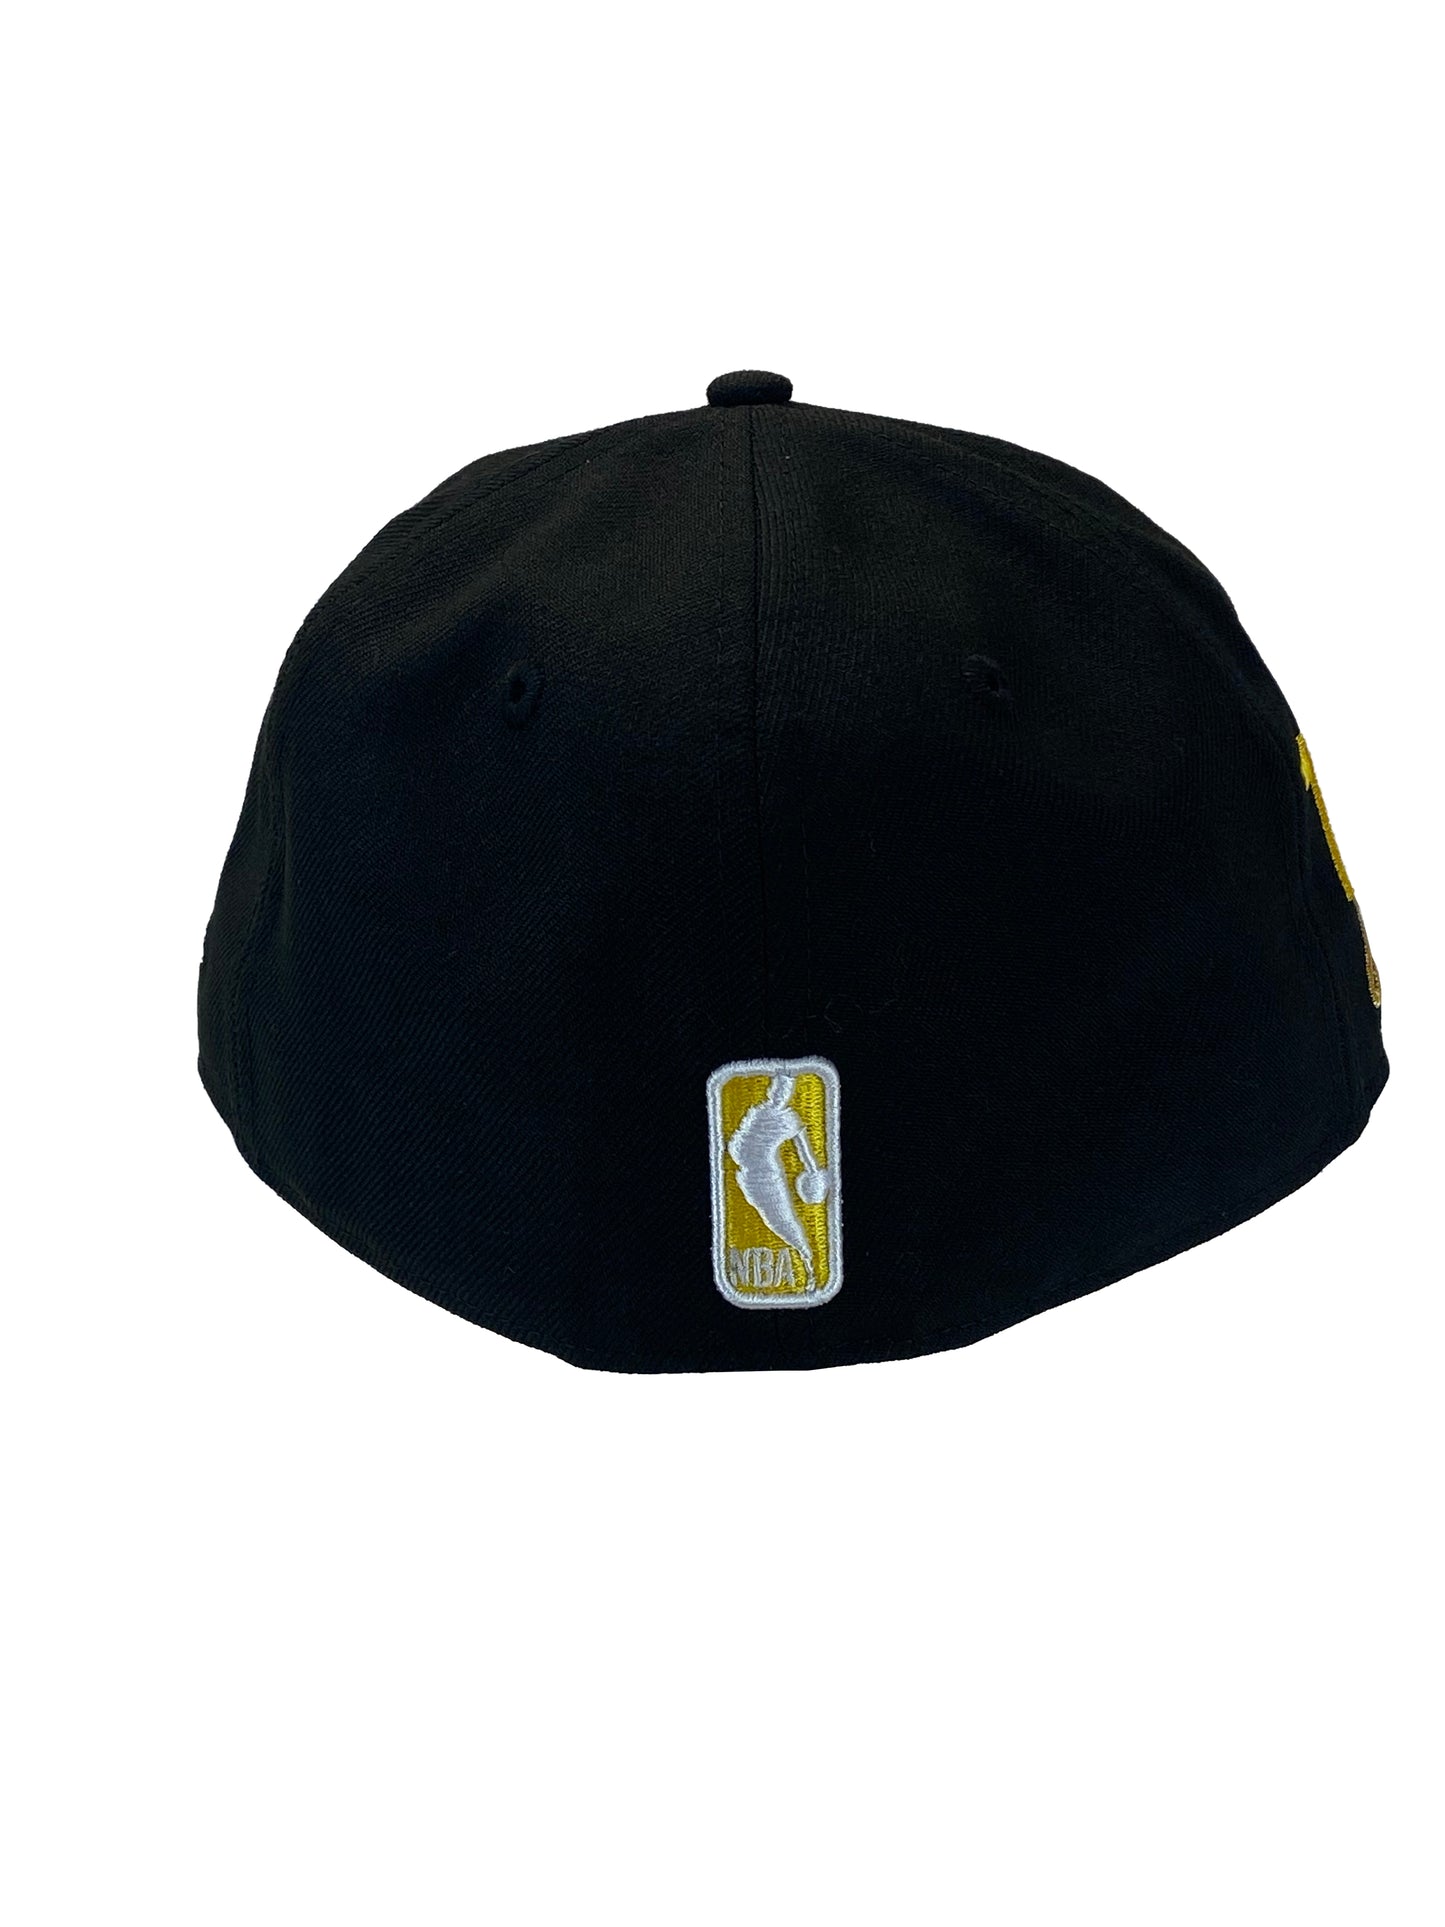 LOS ANGELES LAKERS LIFE QUARTER 59FIFTY FITTED